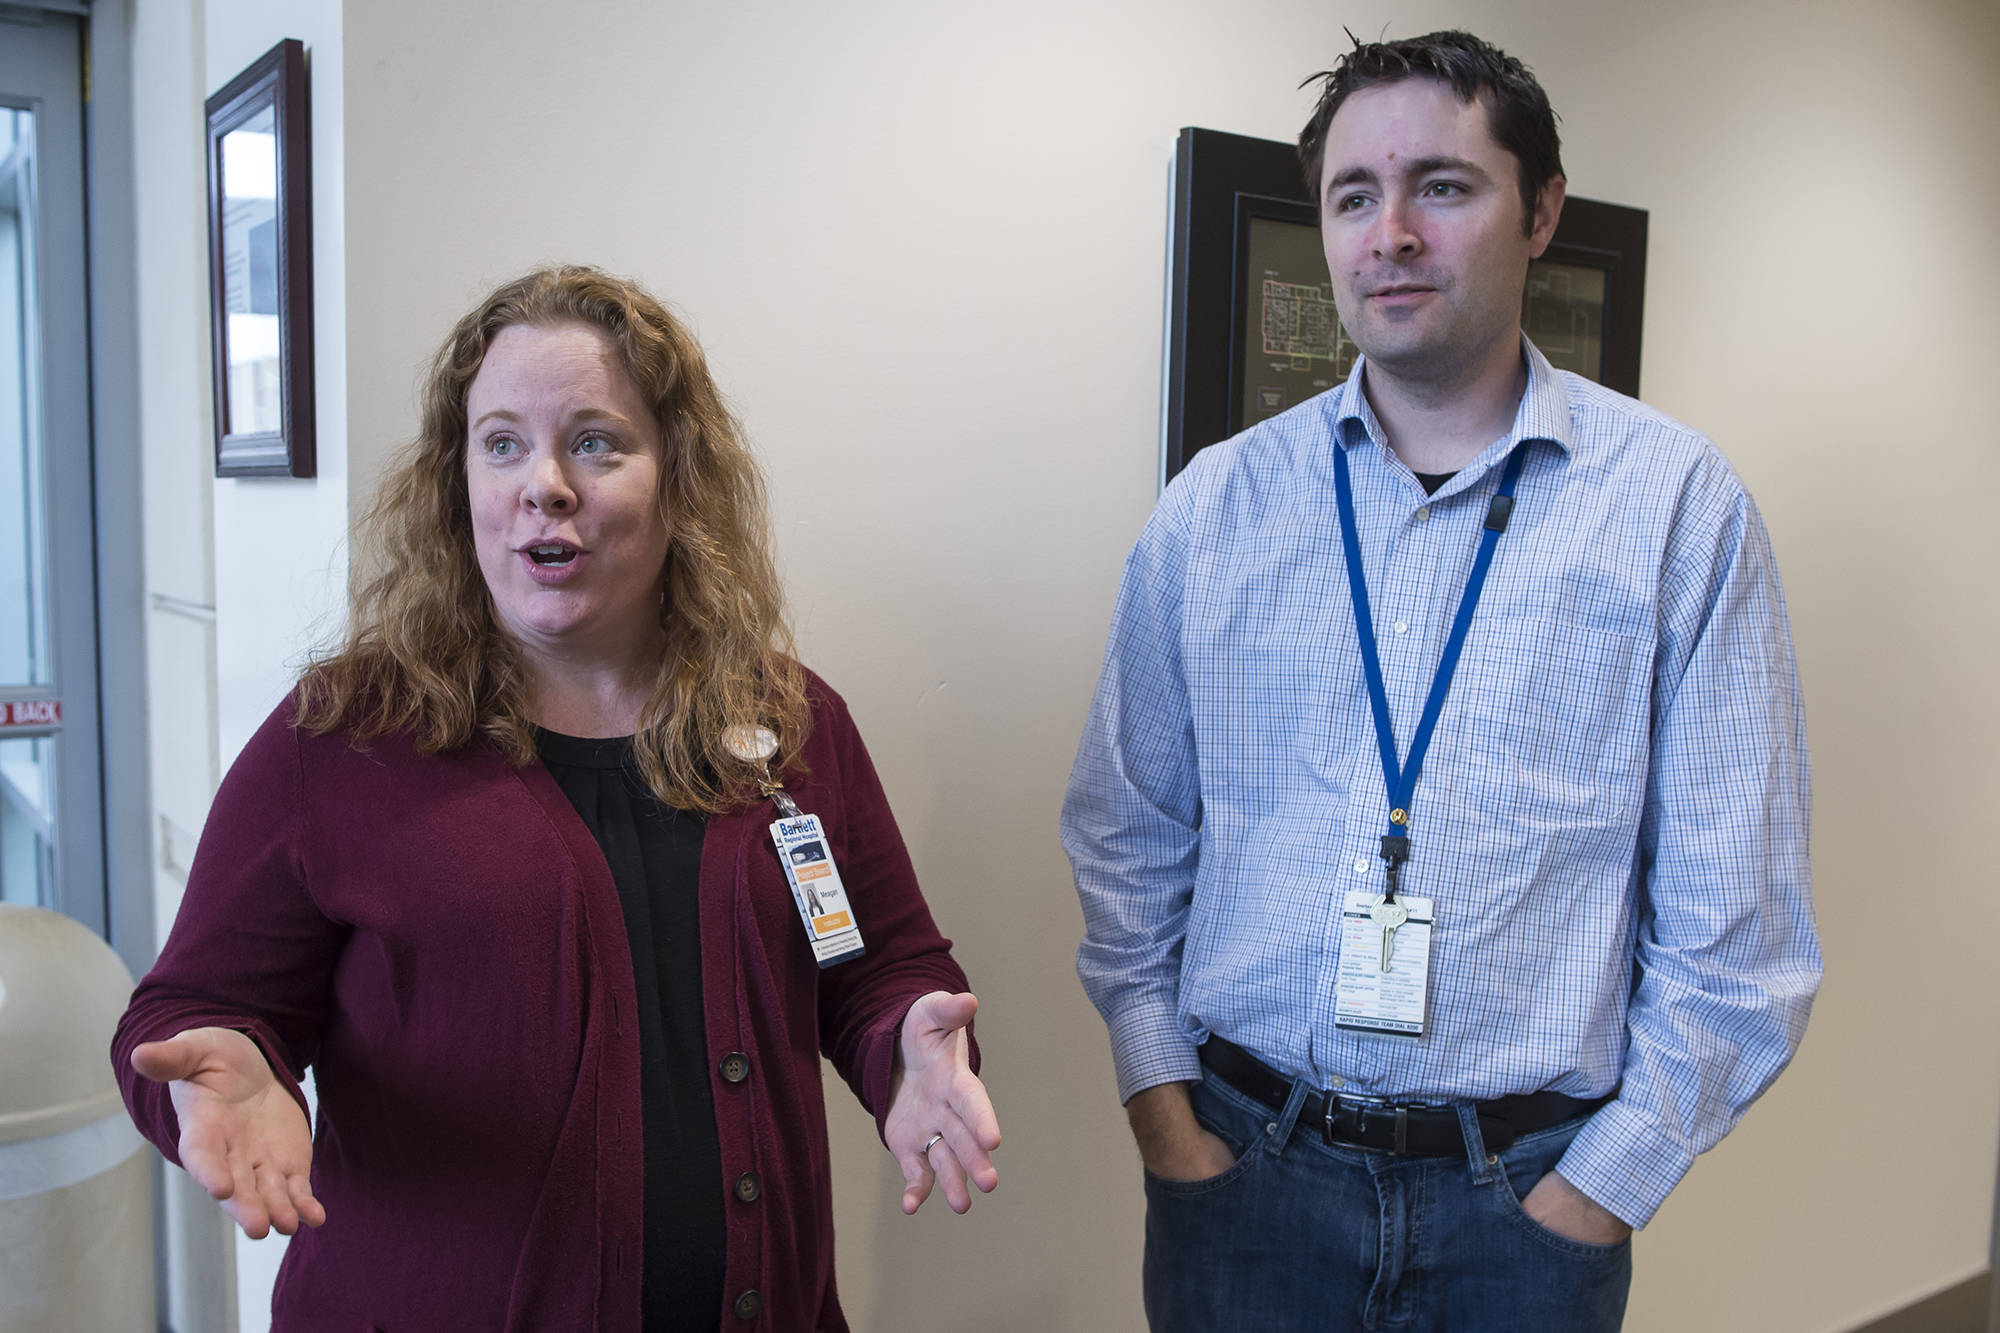 Meagan Hinton, left, an instructor of Project SEARCH, and Jason Bushman, HR specialist, talk about Bartlett Regional Hospital’s internship for young people with disabilities on Friday, Oct. 5, 2018. (Michael Penn | Juneau Empire)